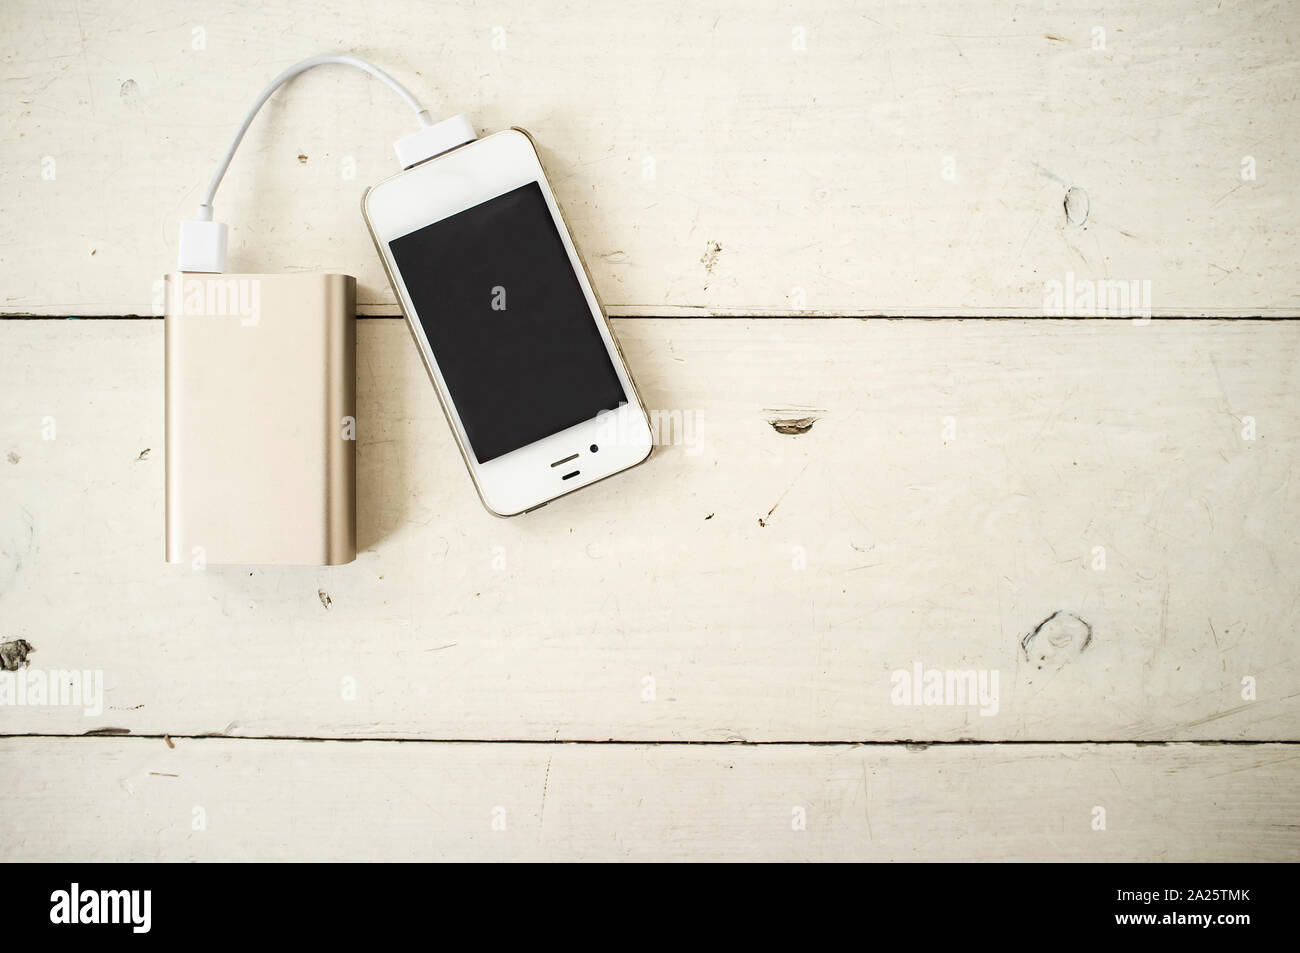 Smartphone is charged from the portable charging device for shabby the wooden table painted in white color Stock Photo